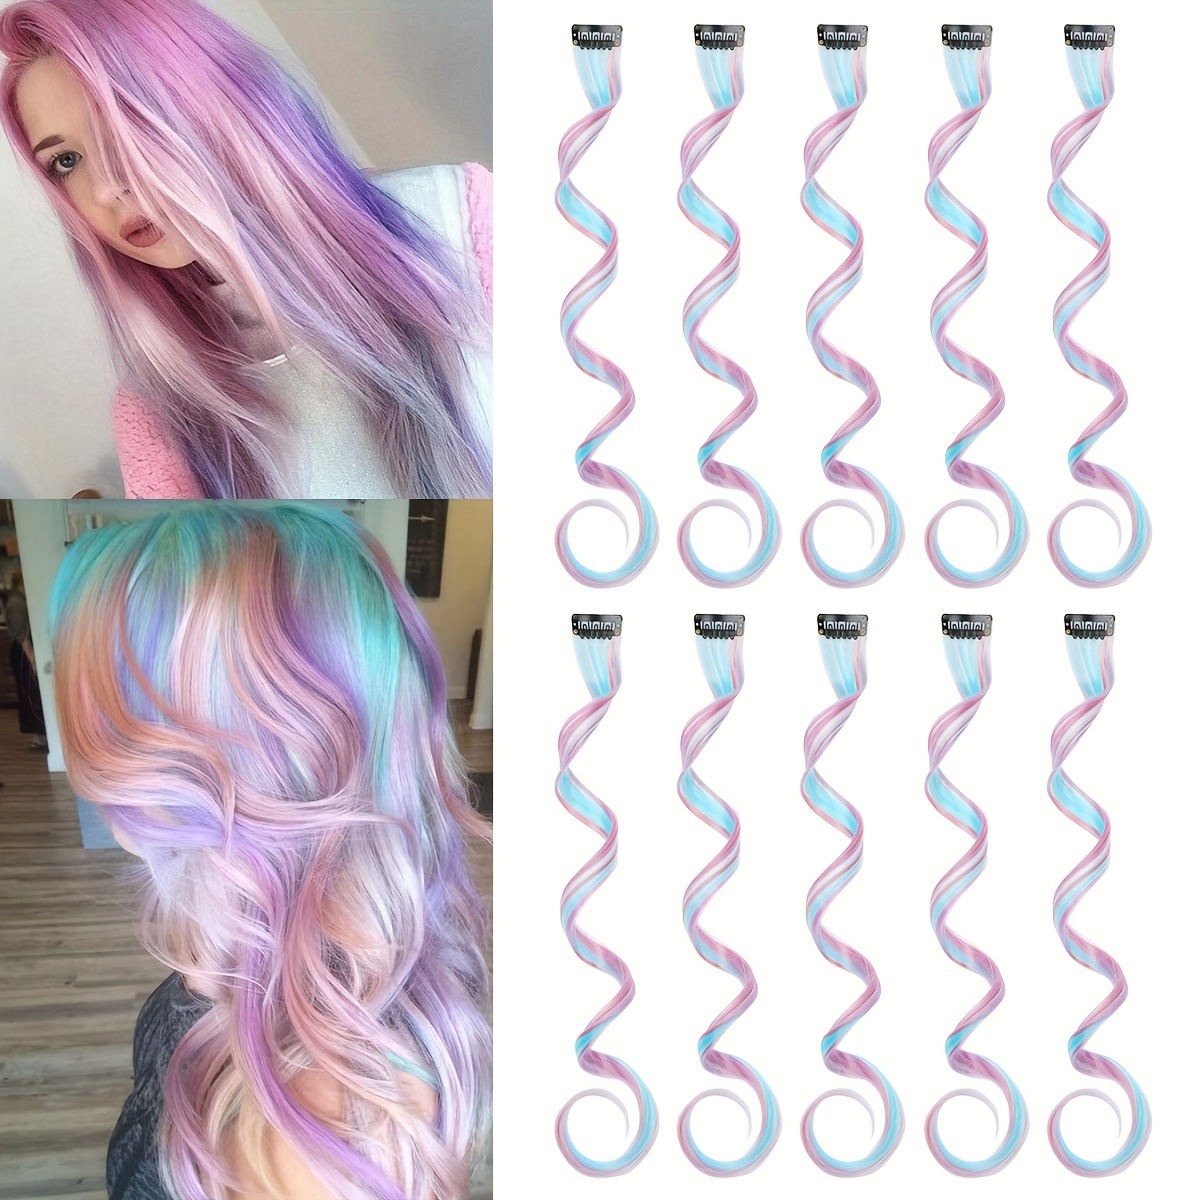 10pcs Colorful Hair Extensions Clips For Daily Wear, Party